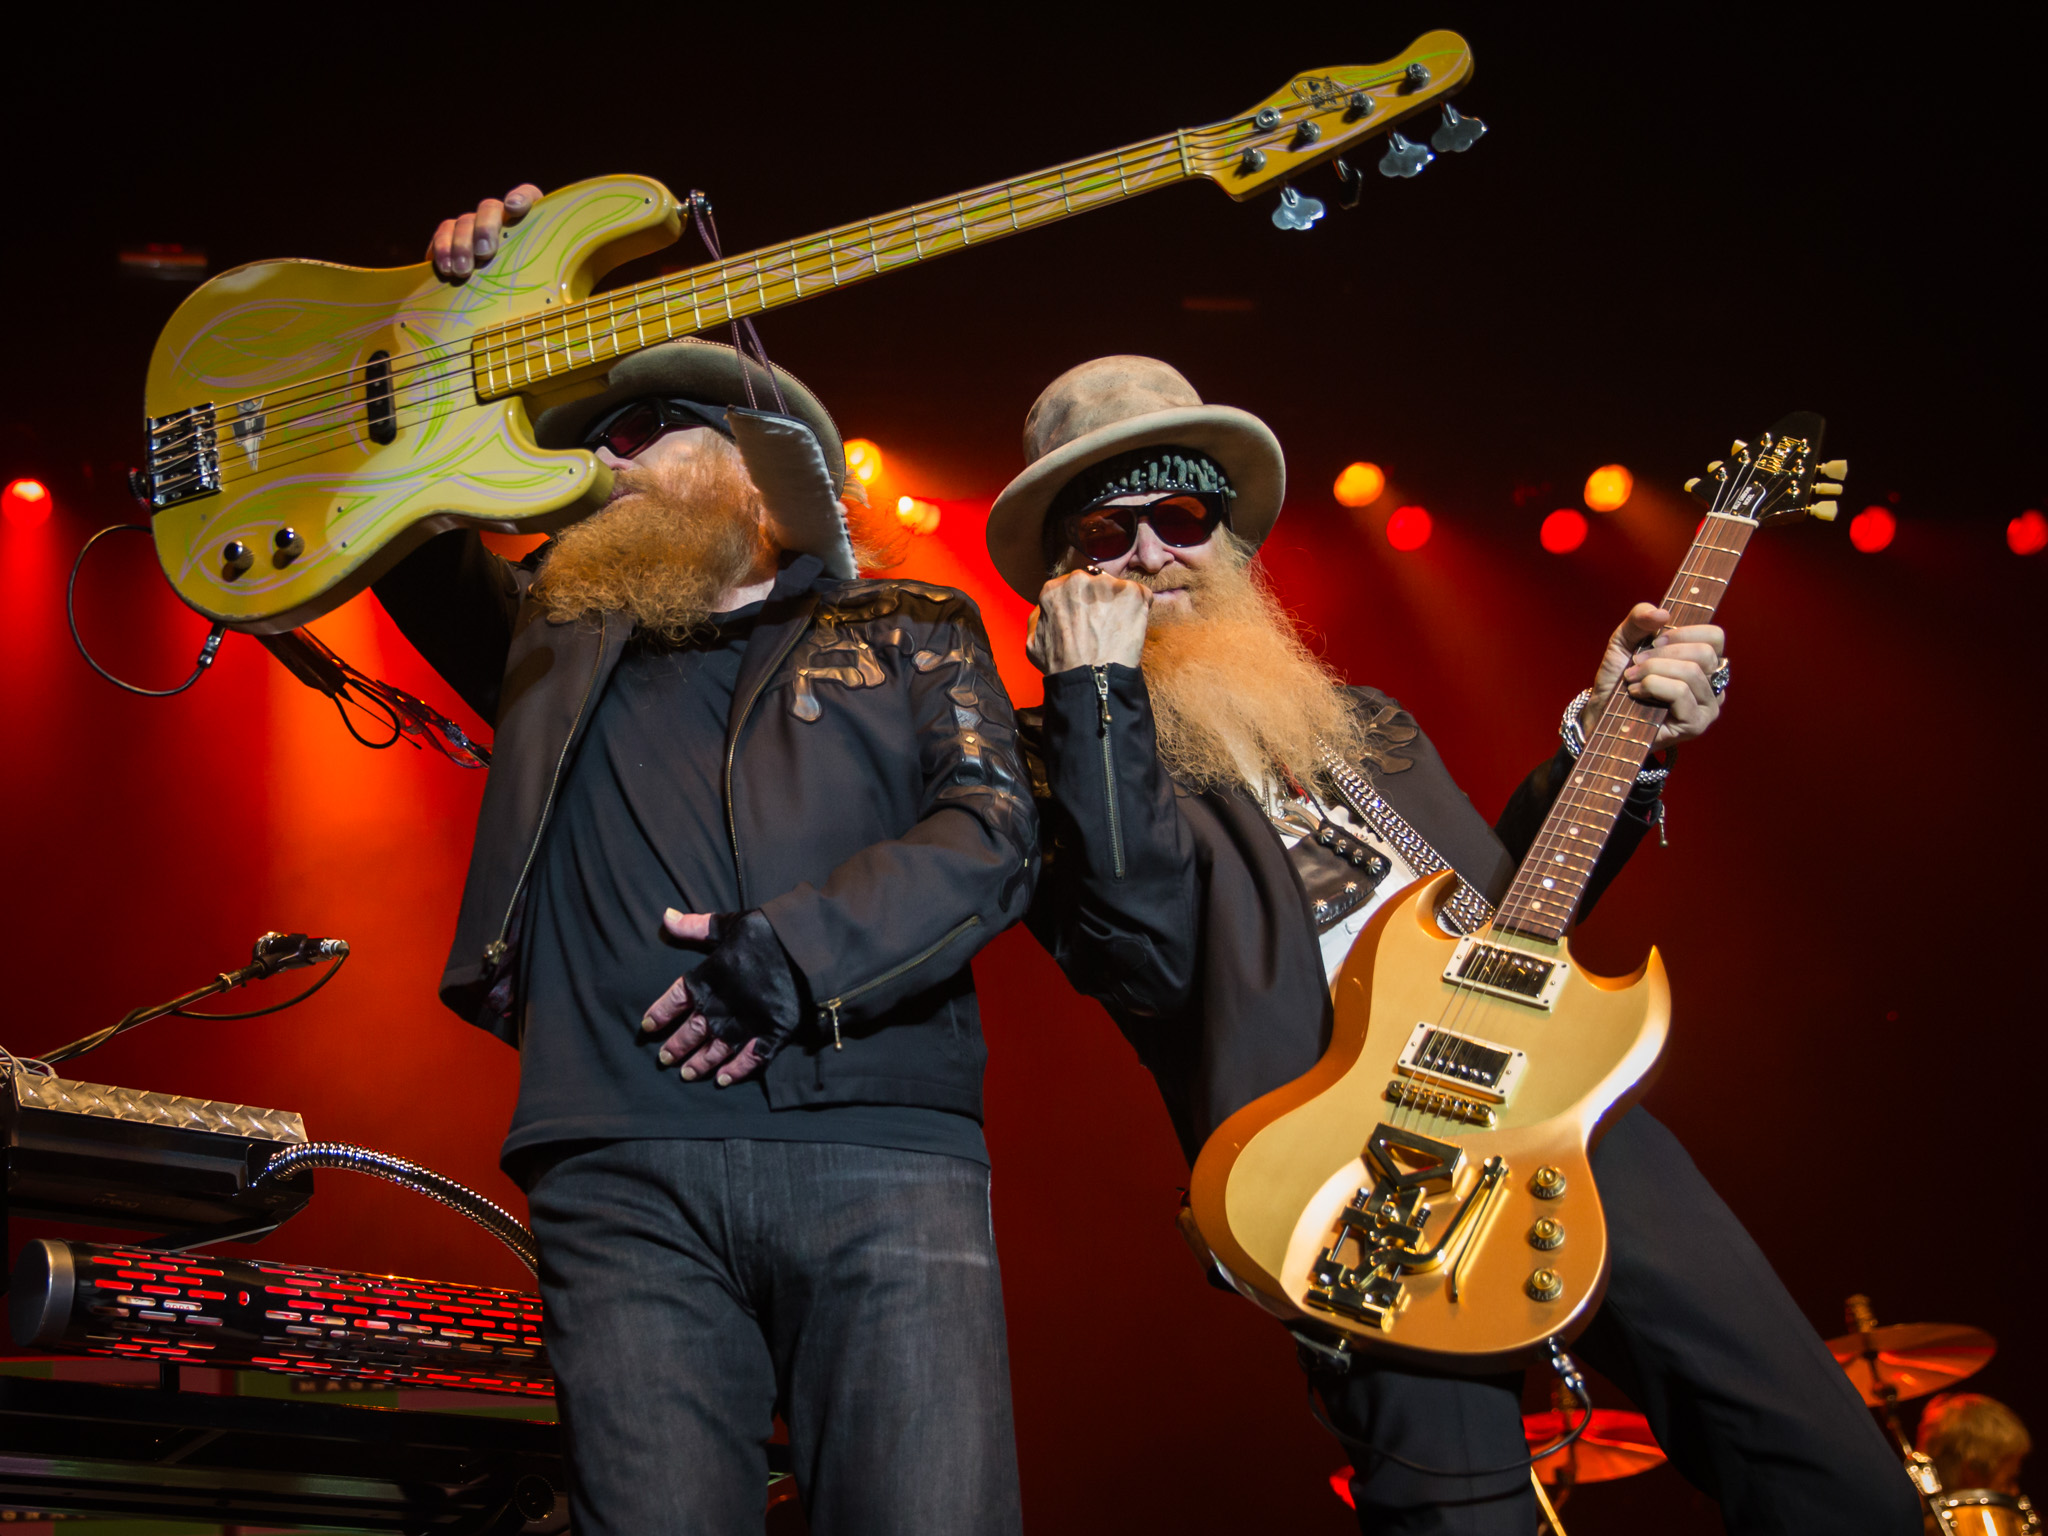 ZZ Top by Bullet-ray Photography